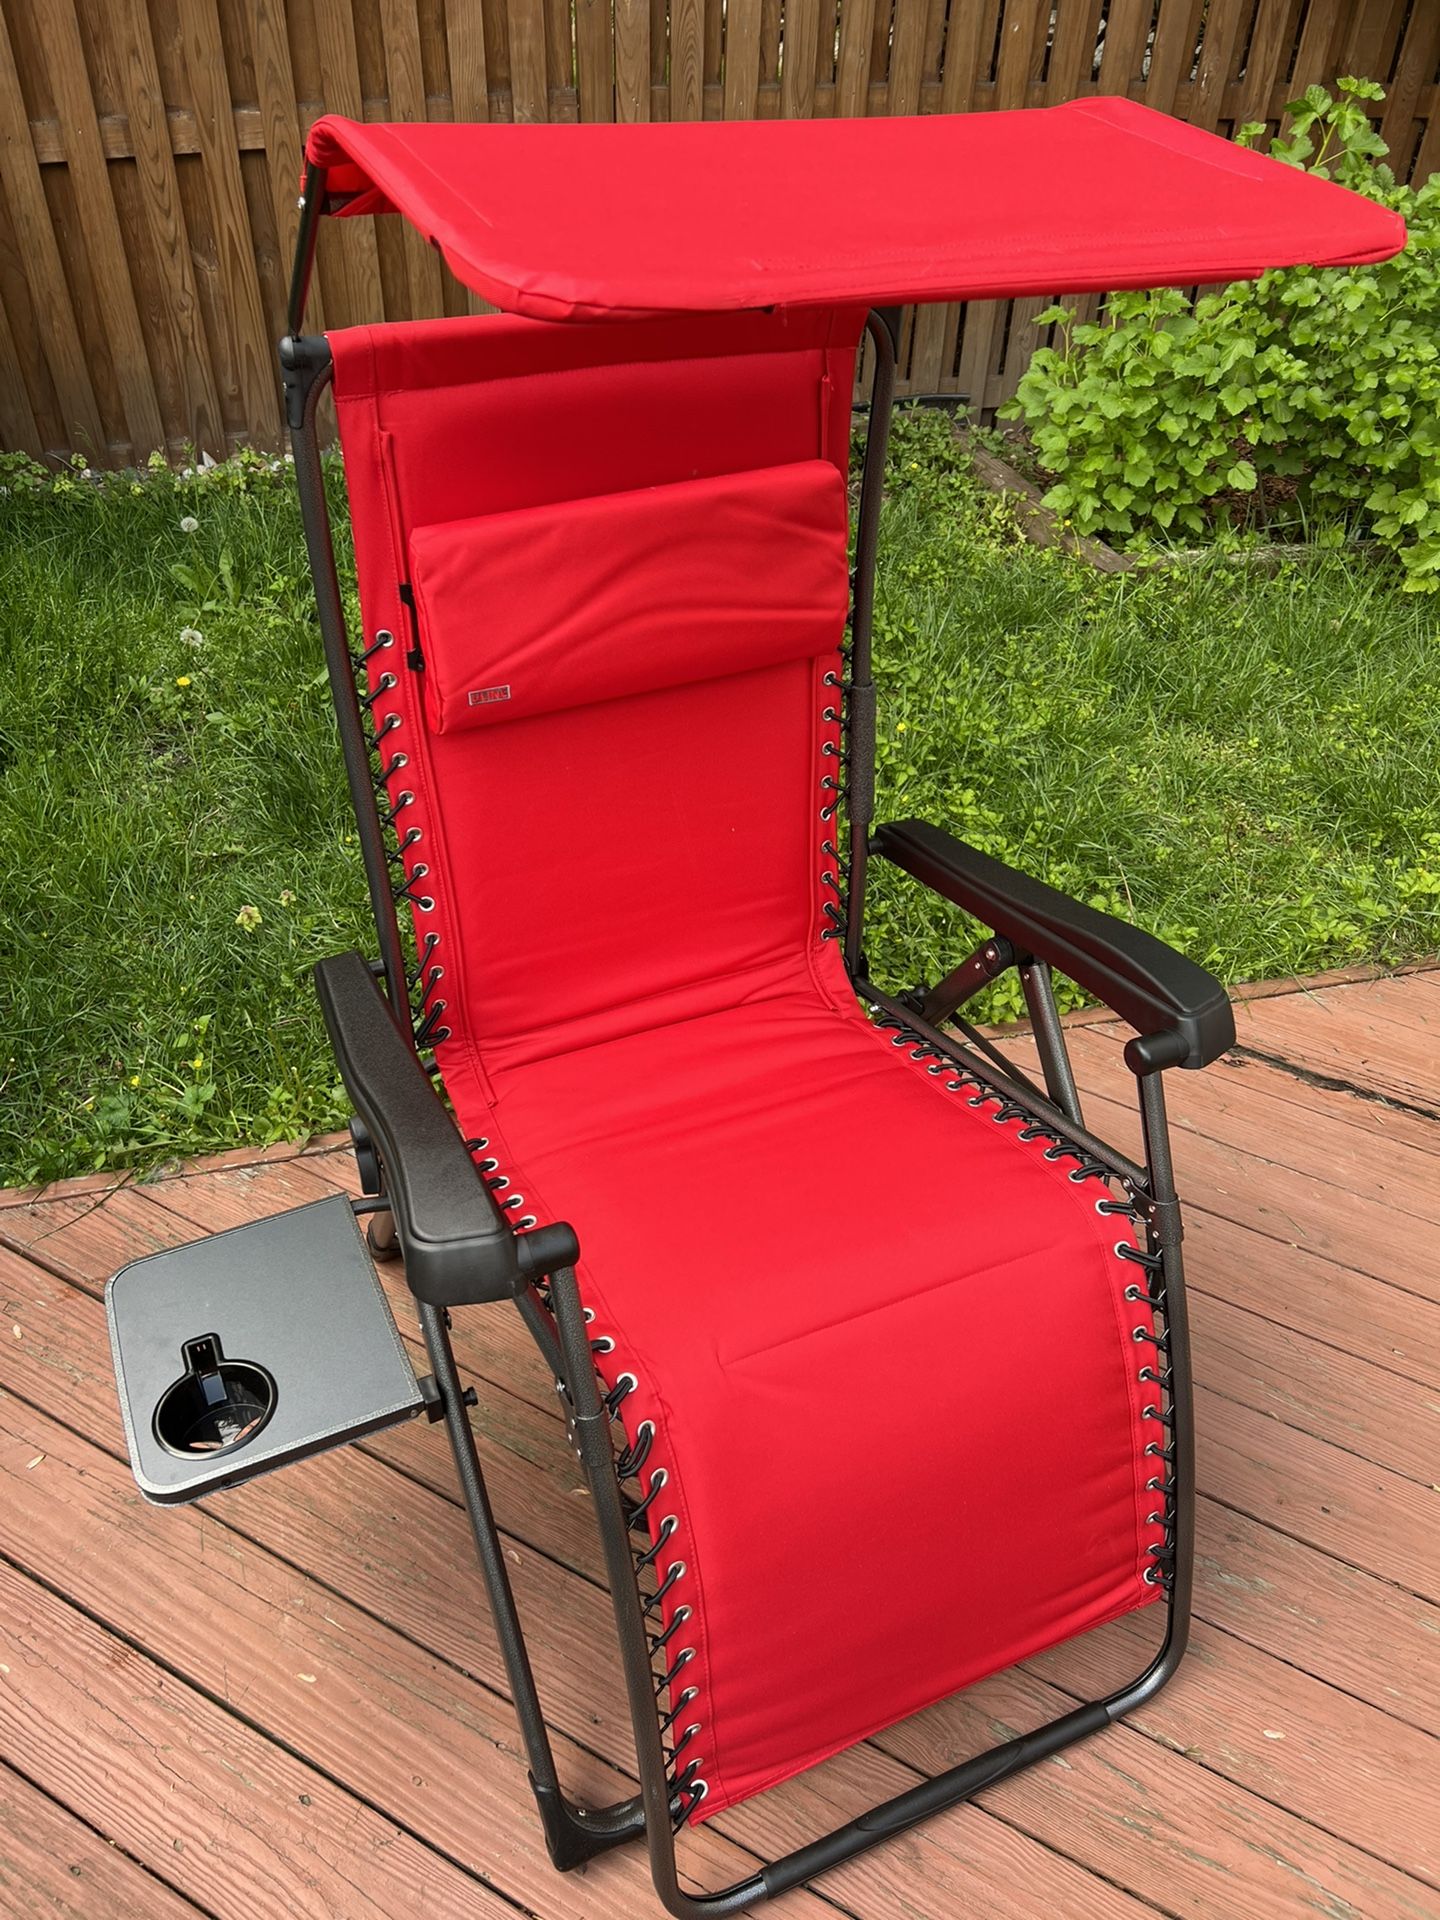 Beach chair with canopy shade, drink holder, storage pouch.